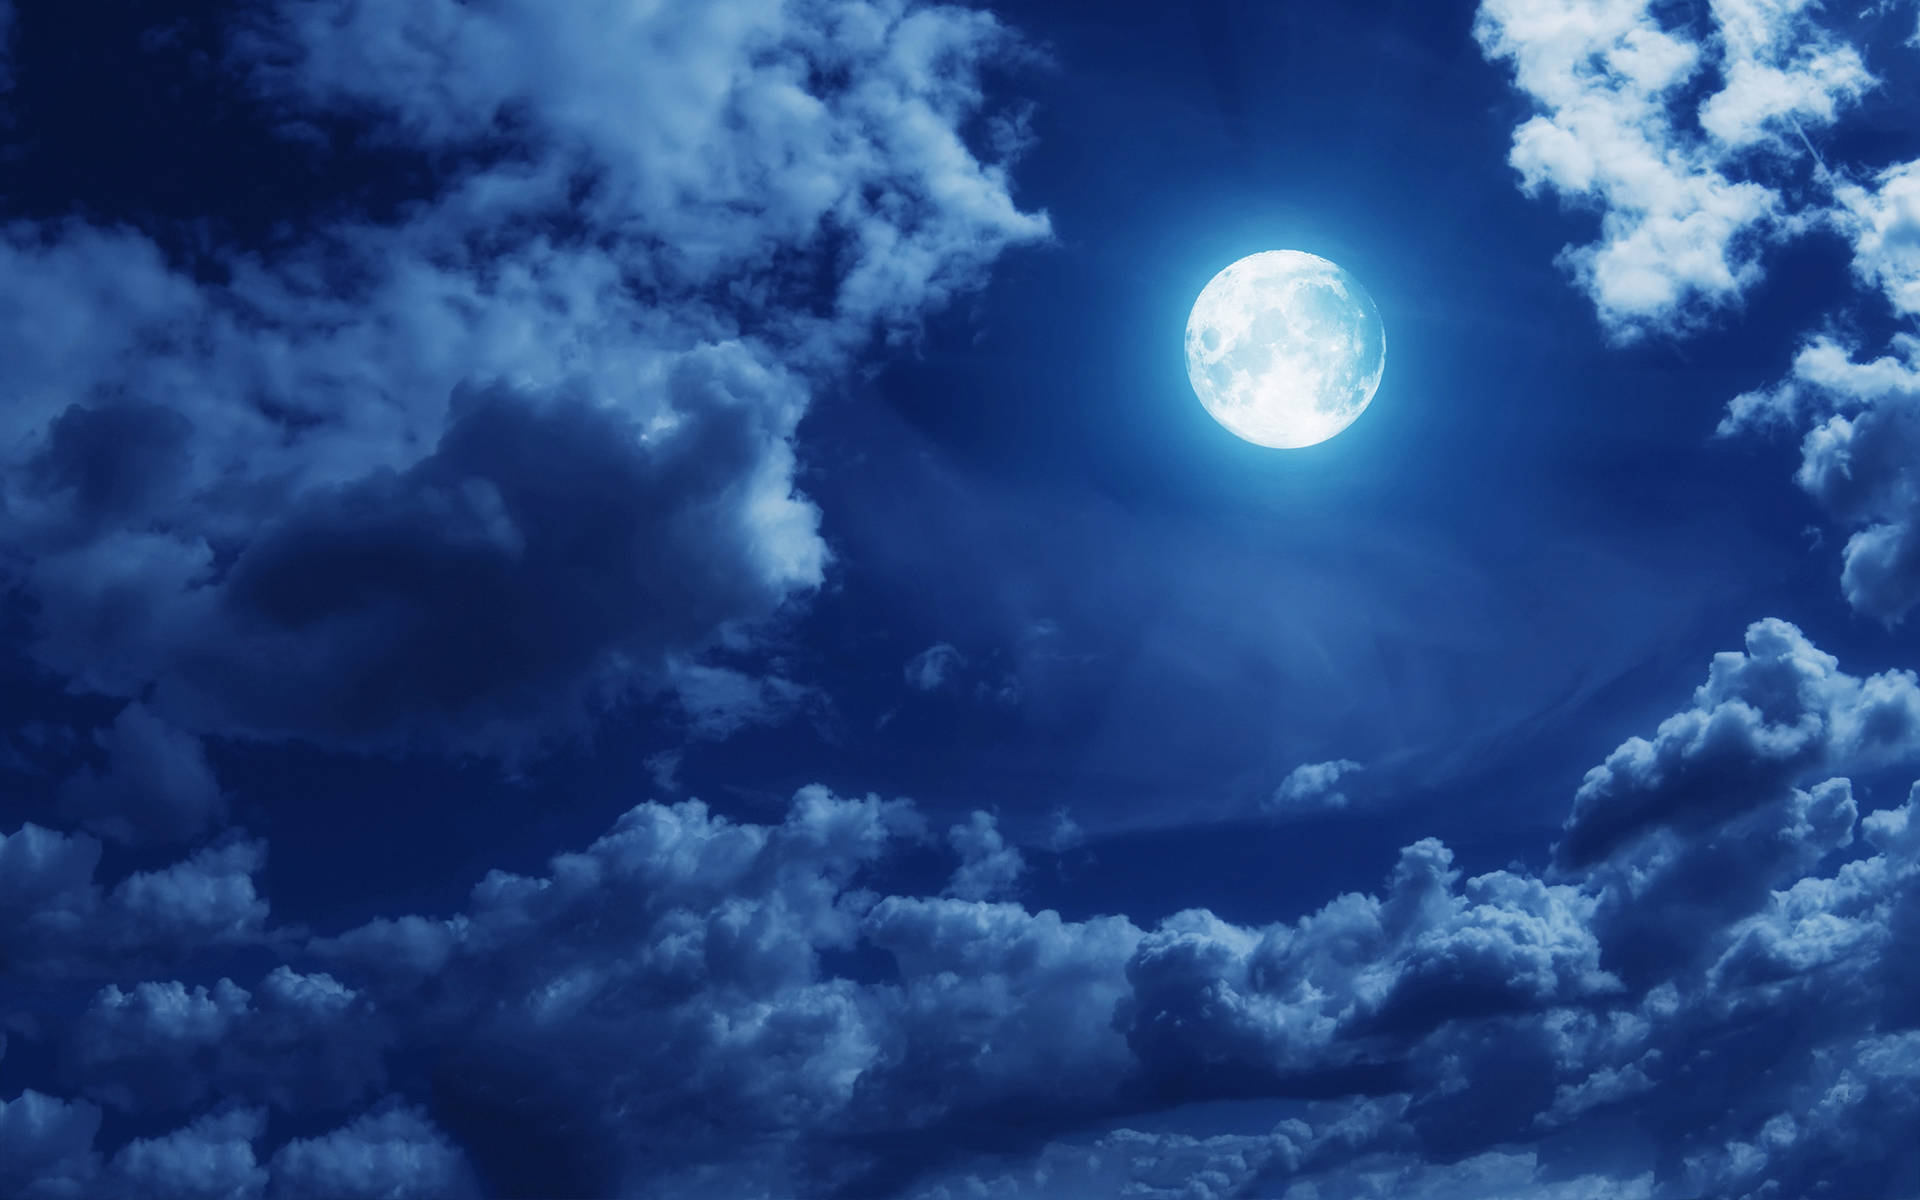 Aesthetic Clouds With Full Moon Background